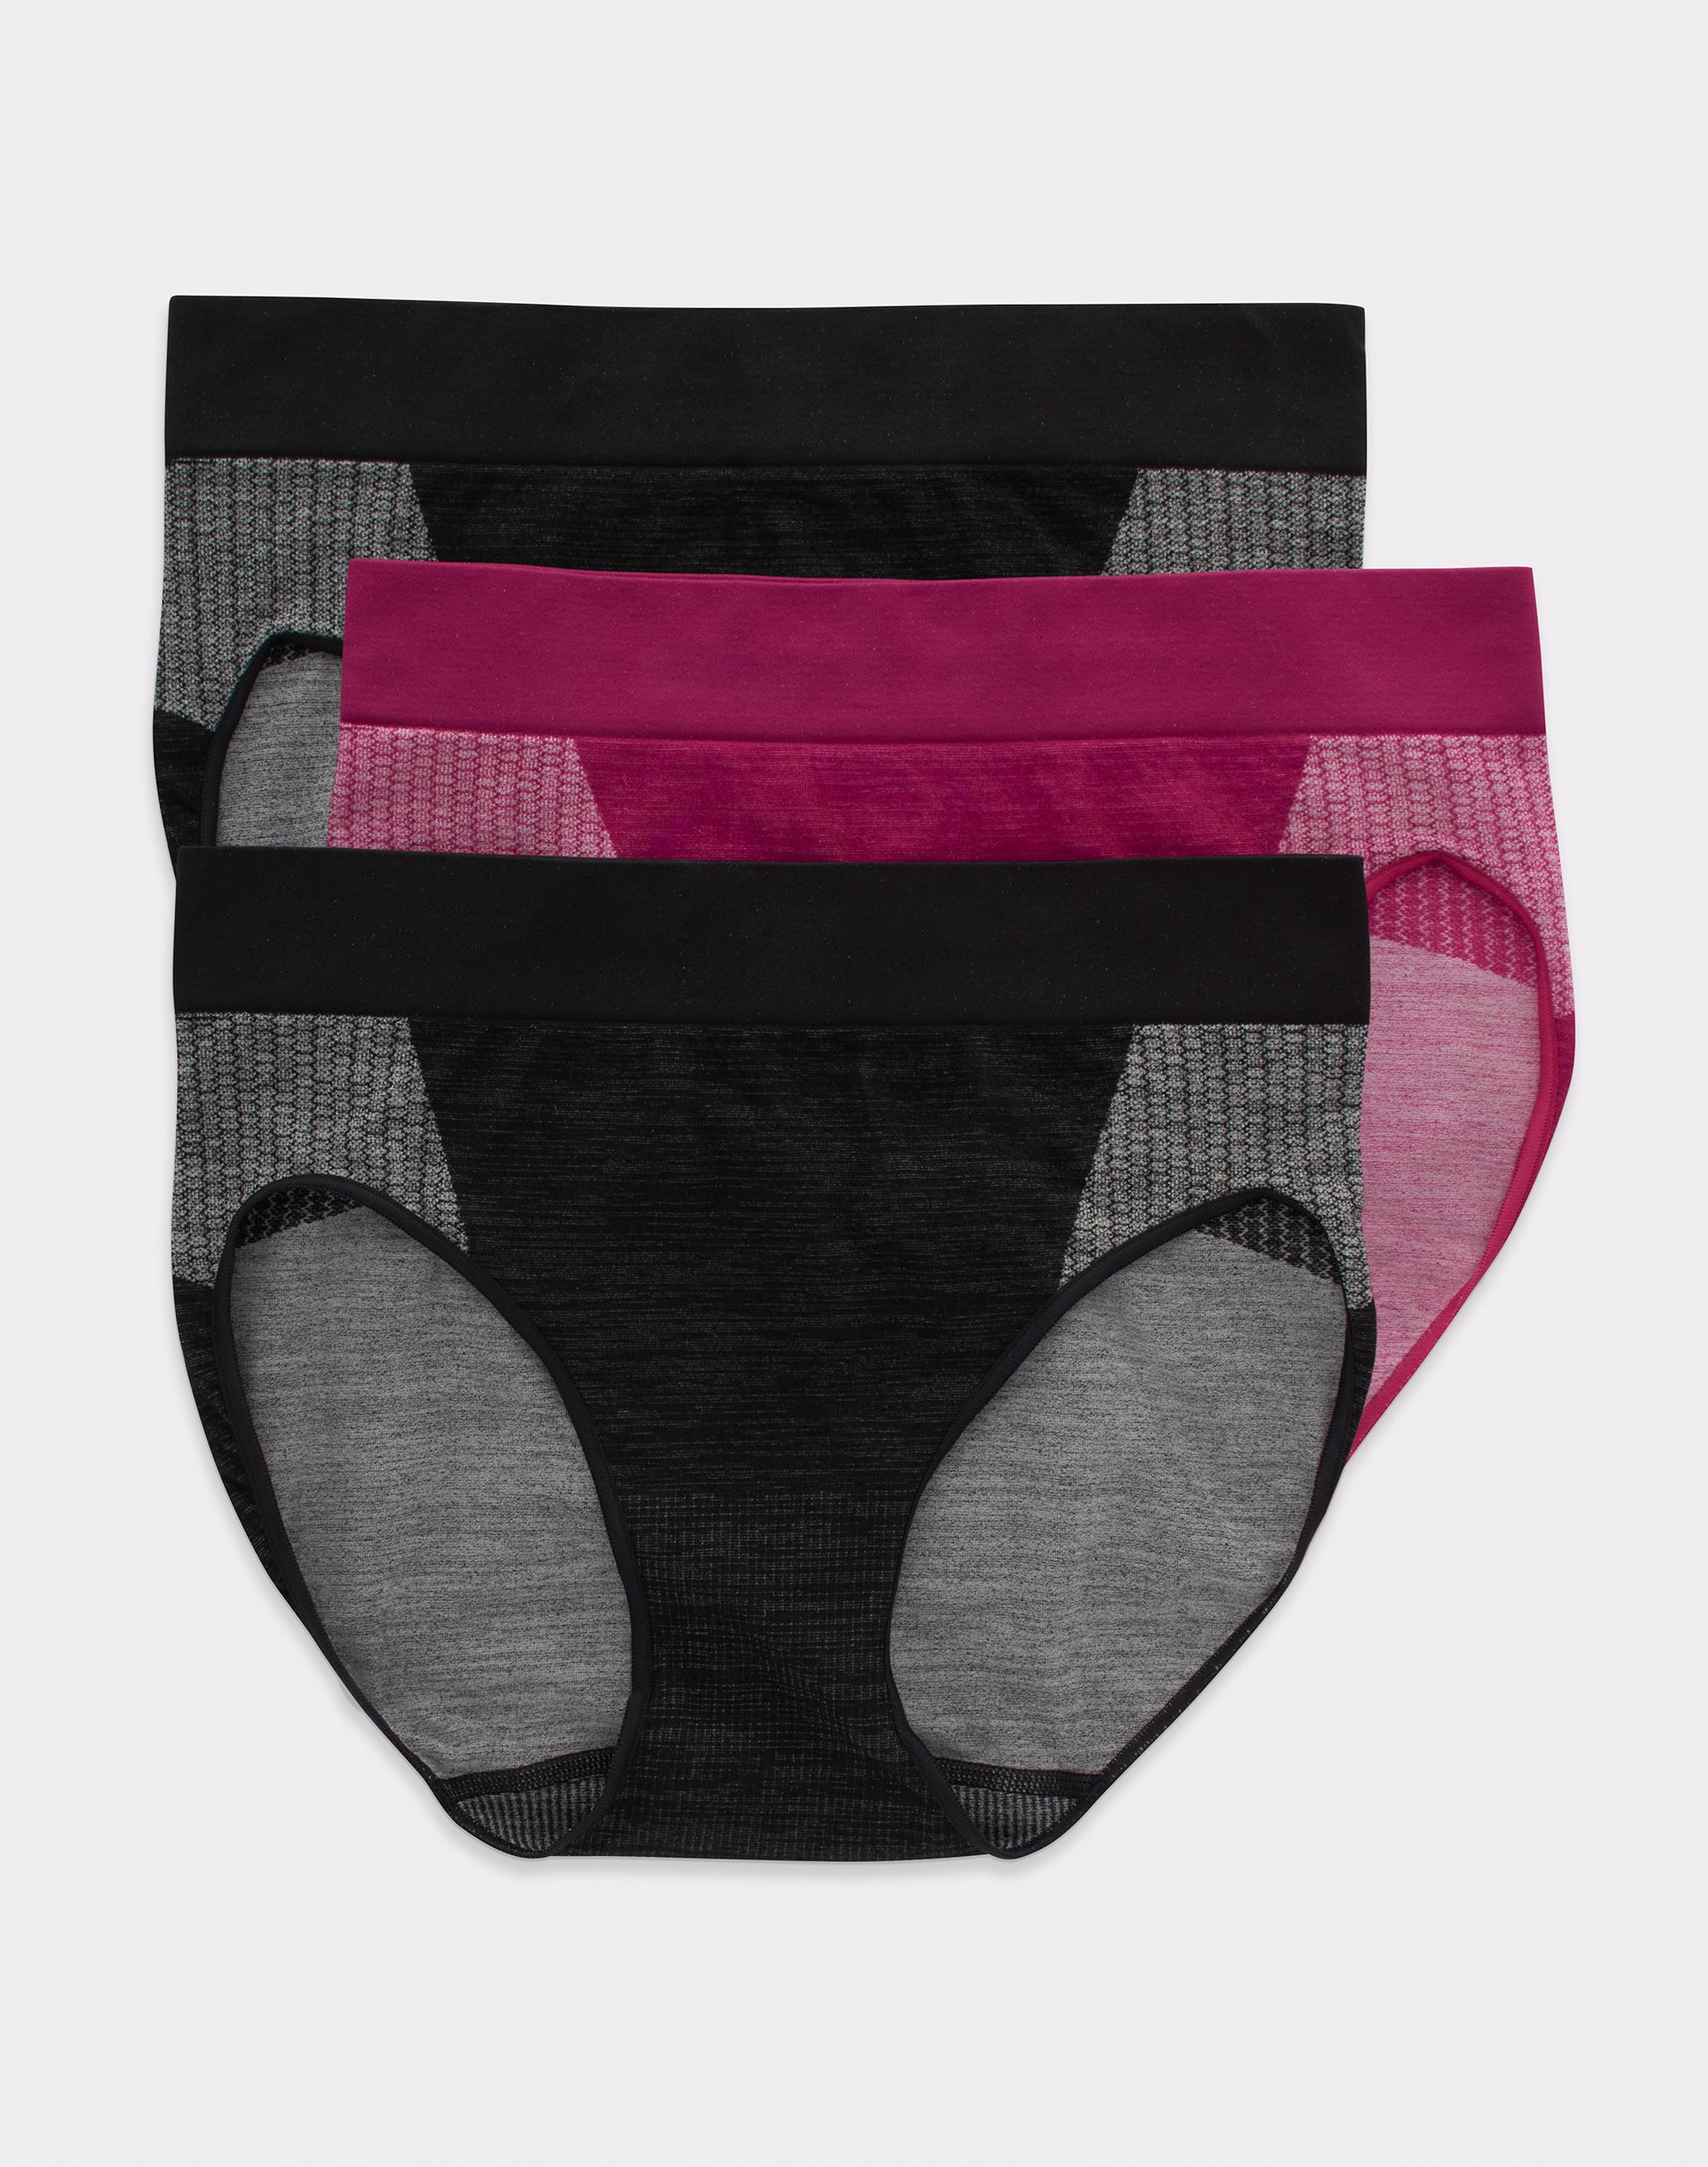 Hanes Women's Sporty Cotton Hipster Underwear, Available in